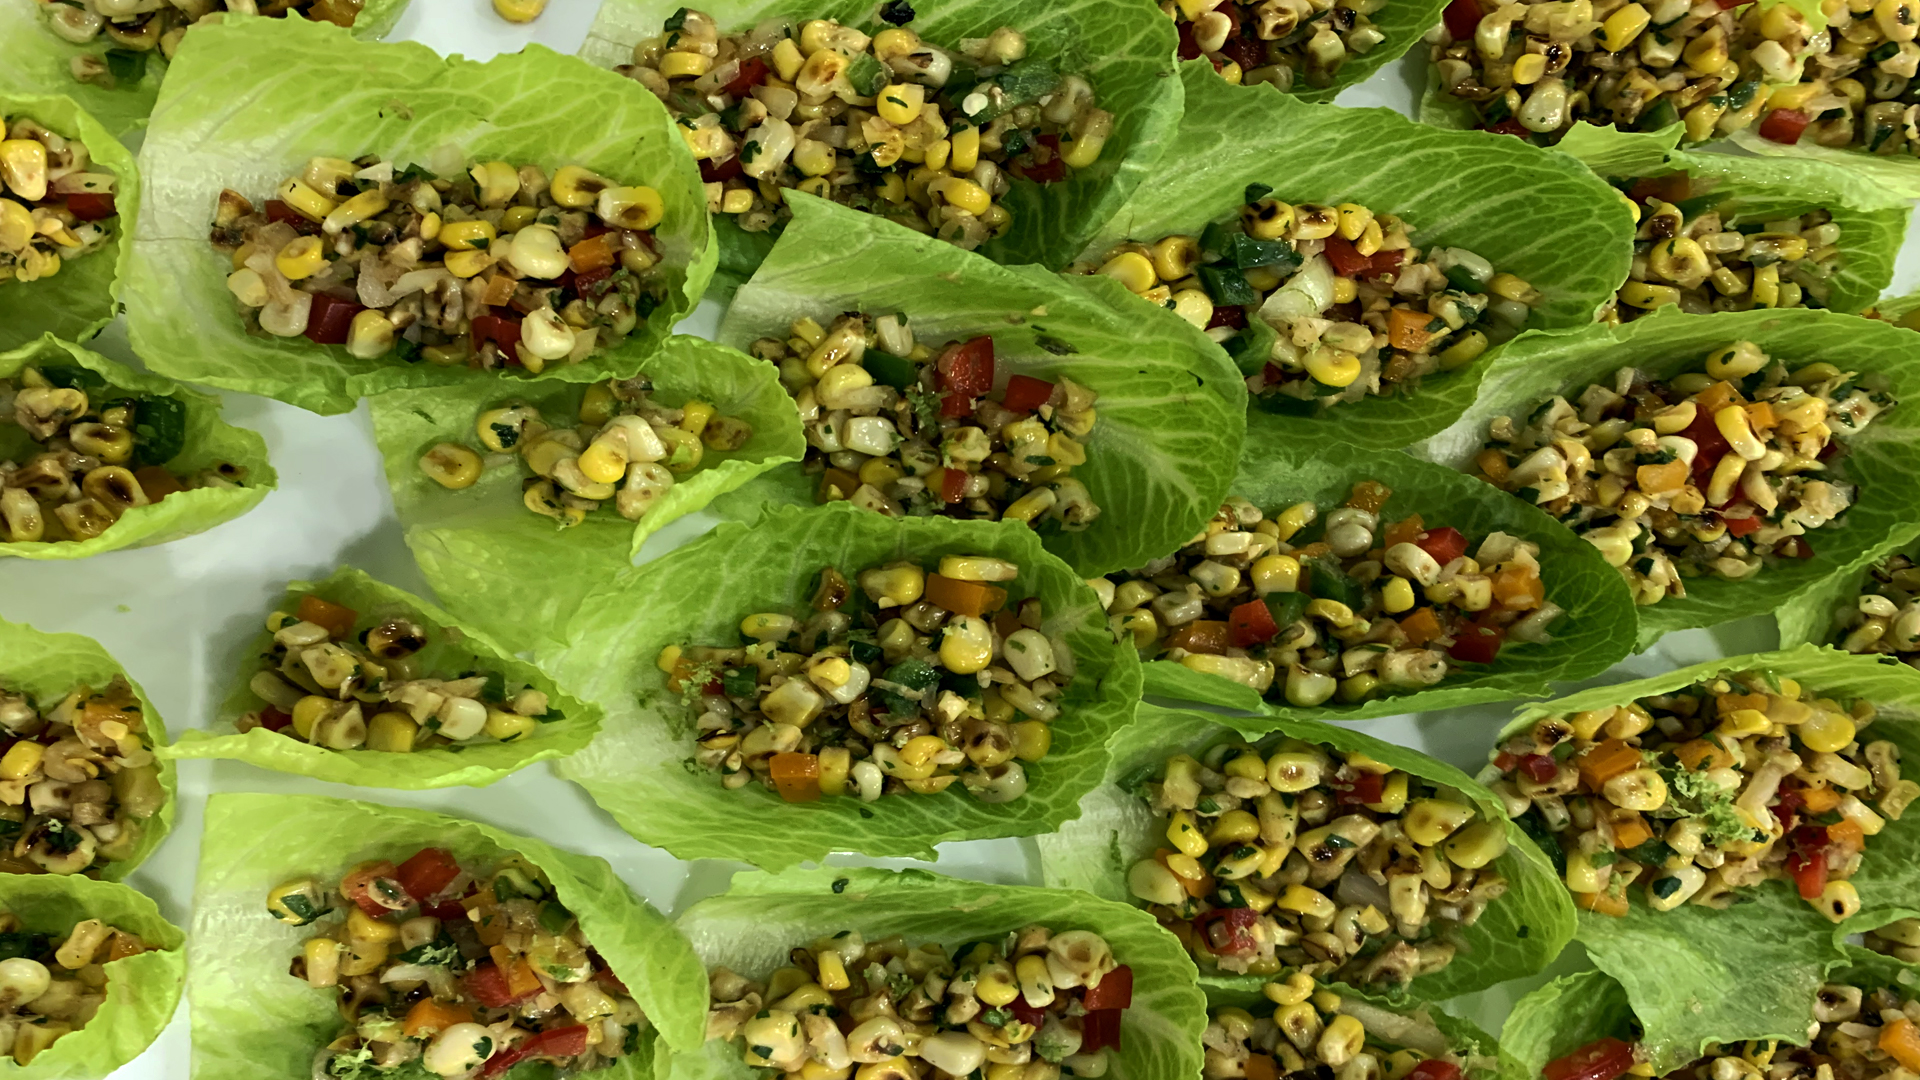 Corn and lettuce cups at the Produce Show